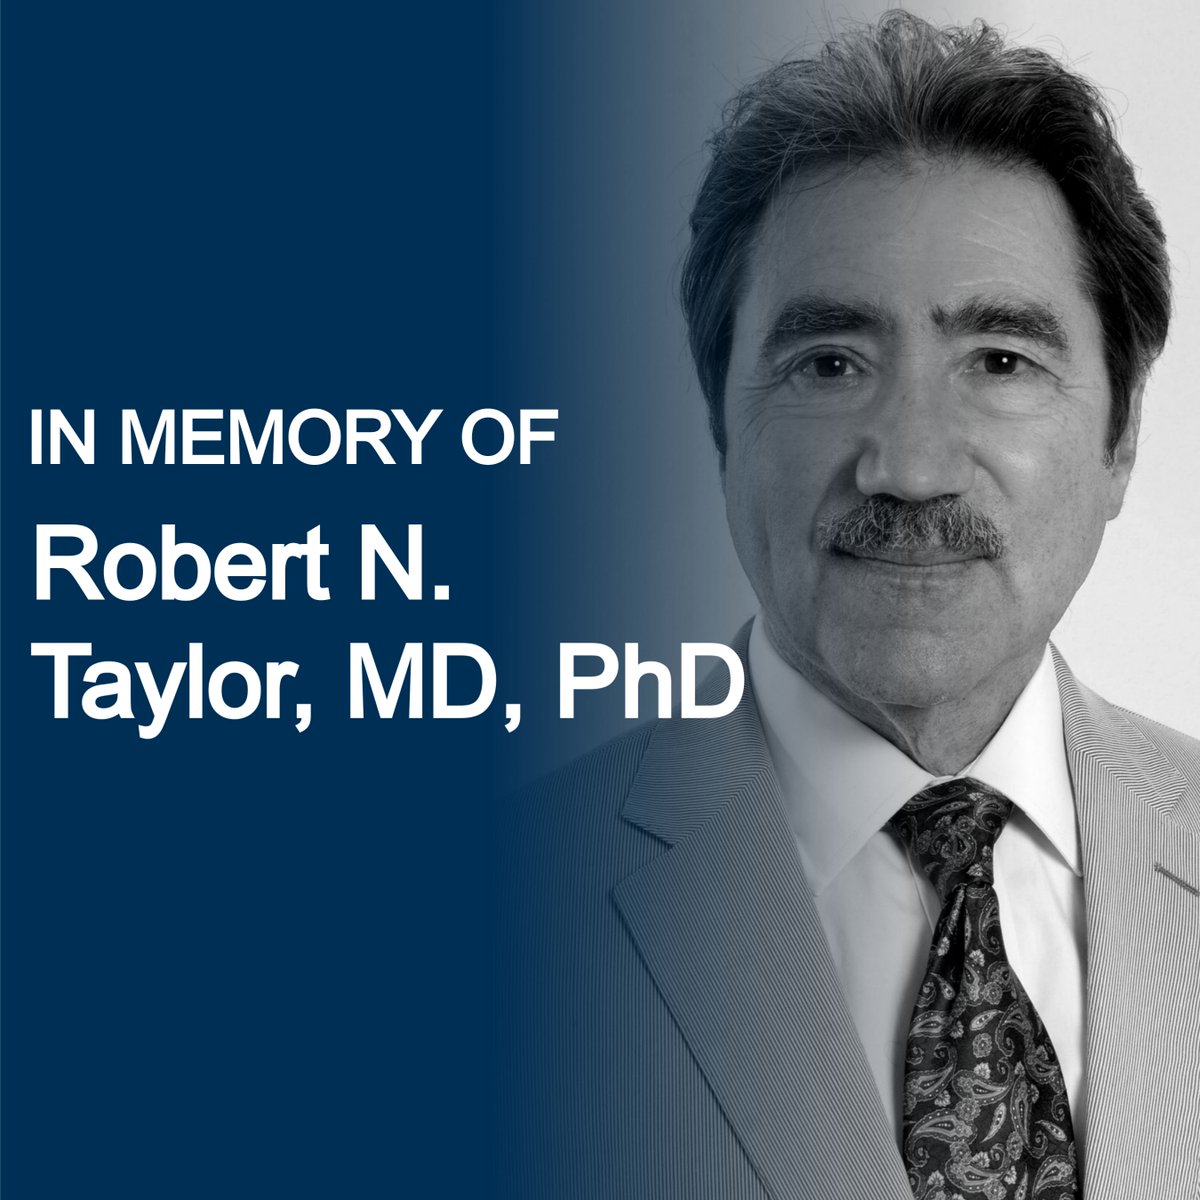 Today we’re paying tribute to a beloved member of our #UBuffalo community, Robert N. Taylor, MD, PhD, who died on January 22. He was assistant dean & director of the MD-PhD Program & professor of obstetrics & gynecology. Read the full “in memoriam” piece: buff.ly/3UlER6d